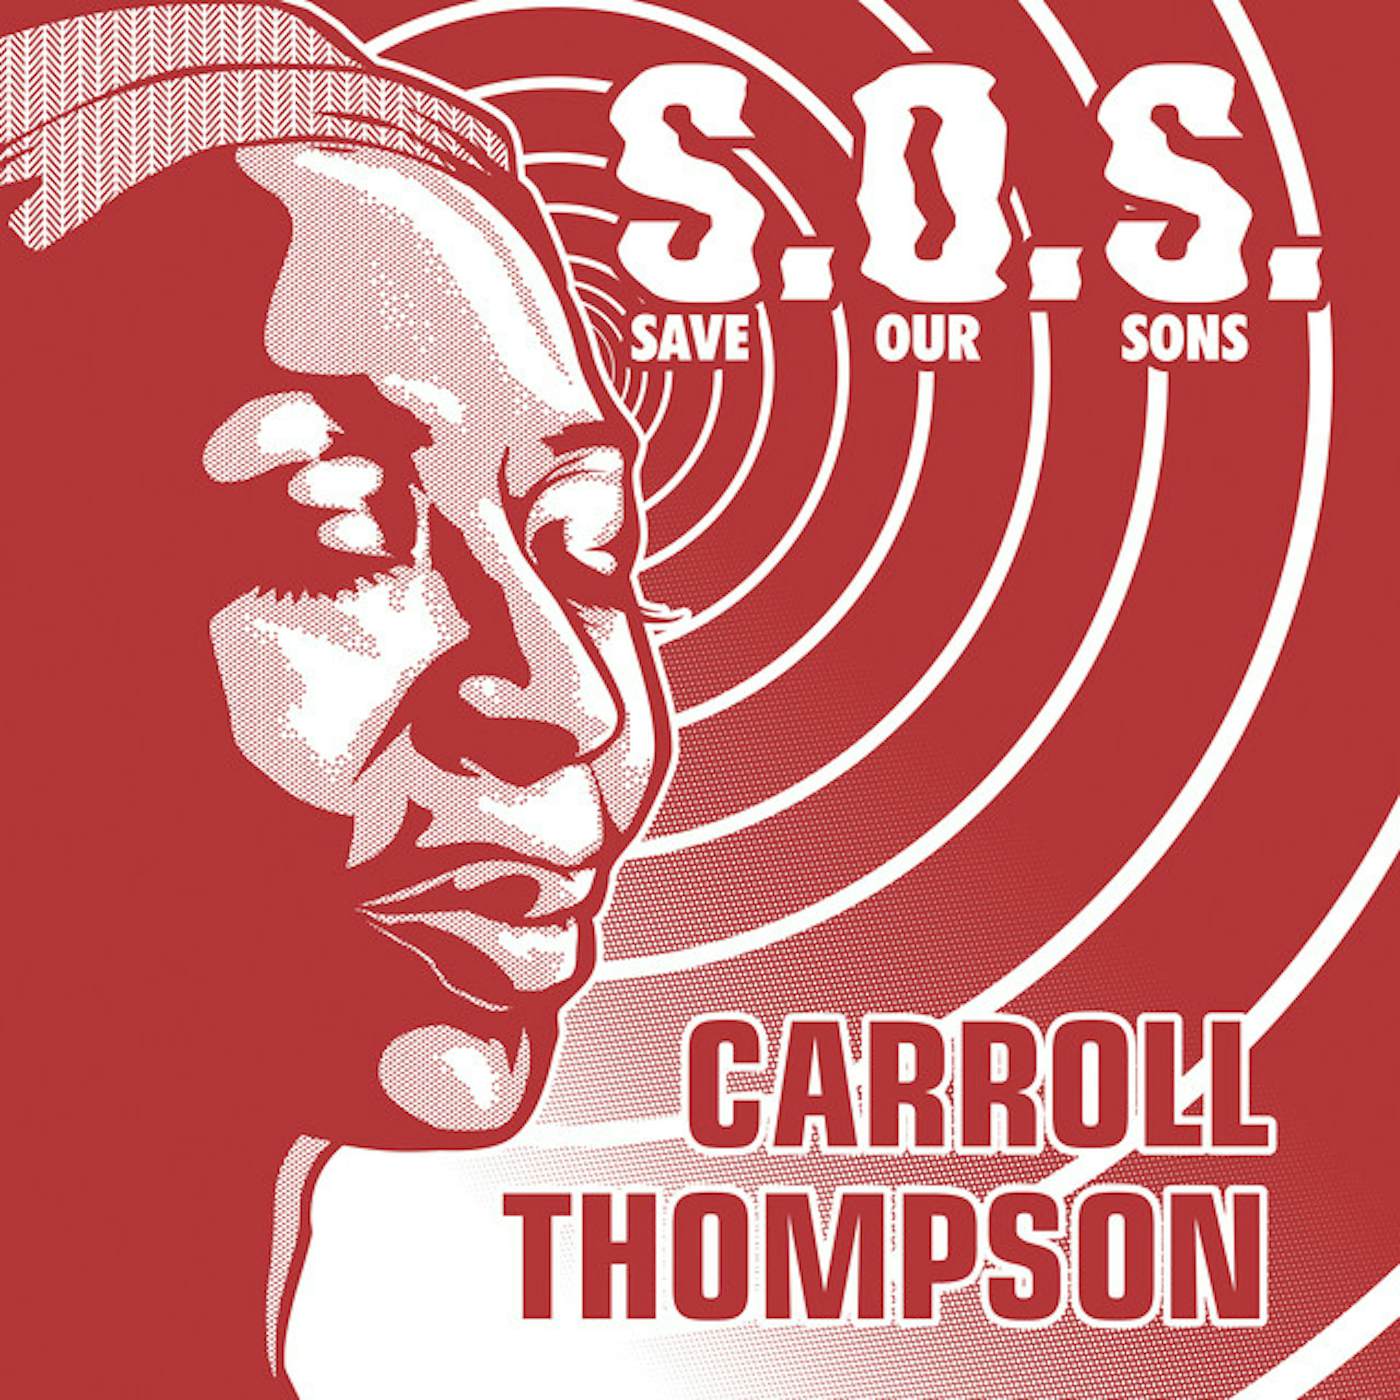 Carroll Thompson S.O.S (Save Our Sons) Vinyl Record